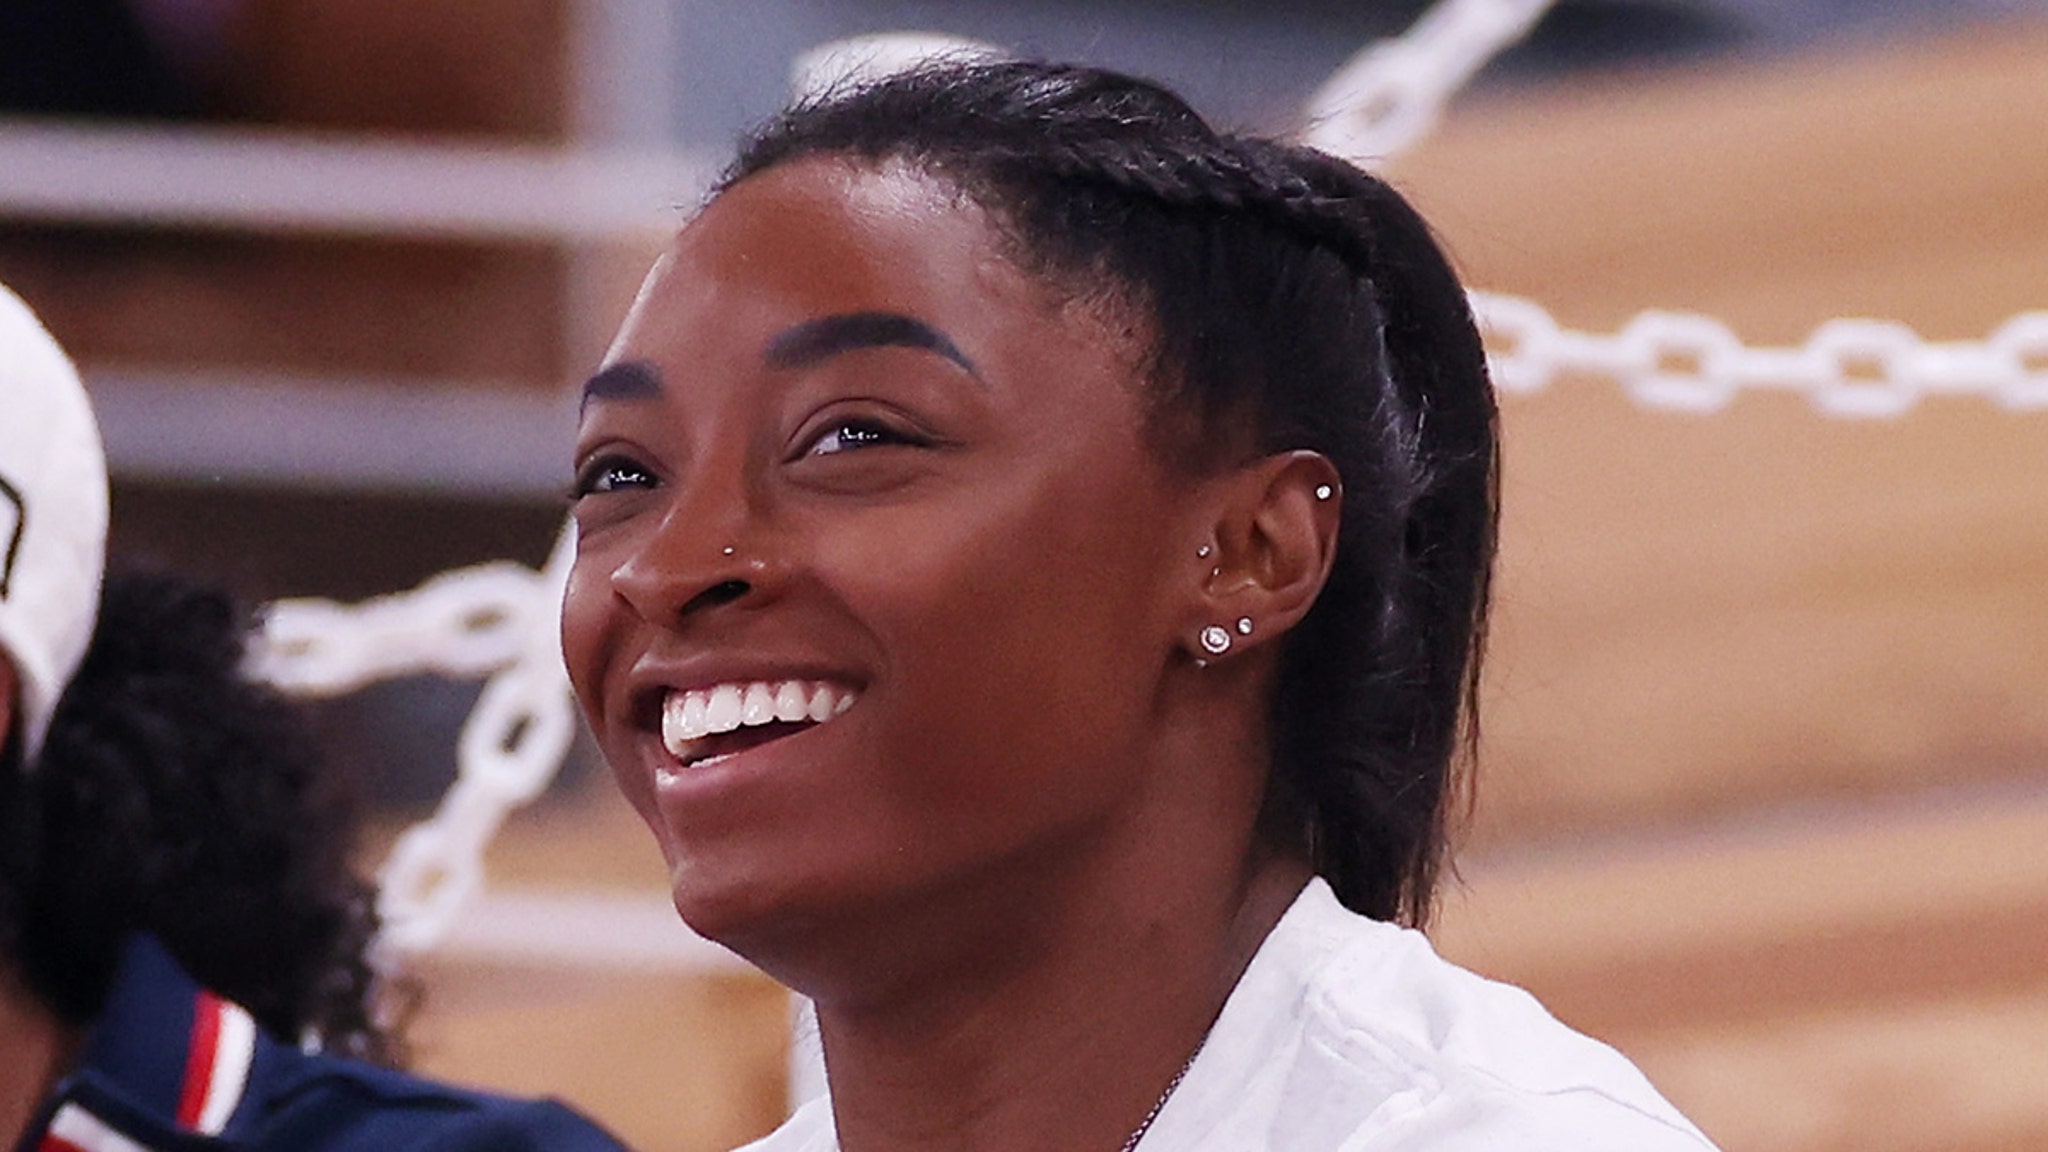 Simone Biles Set For Olympics Return In Balance Beam Event, Team USA 'So Excited..